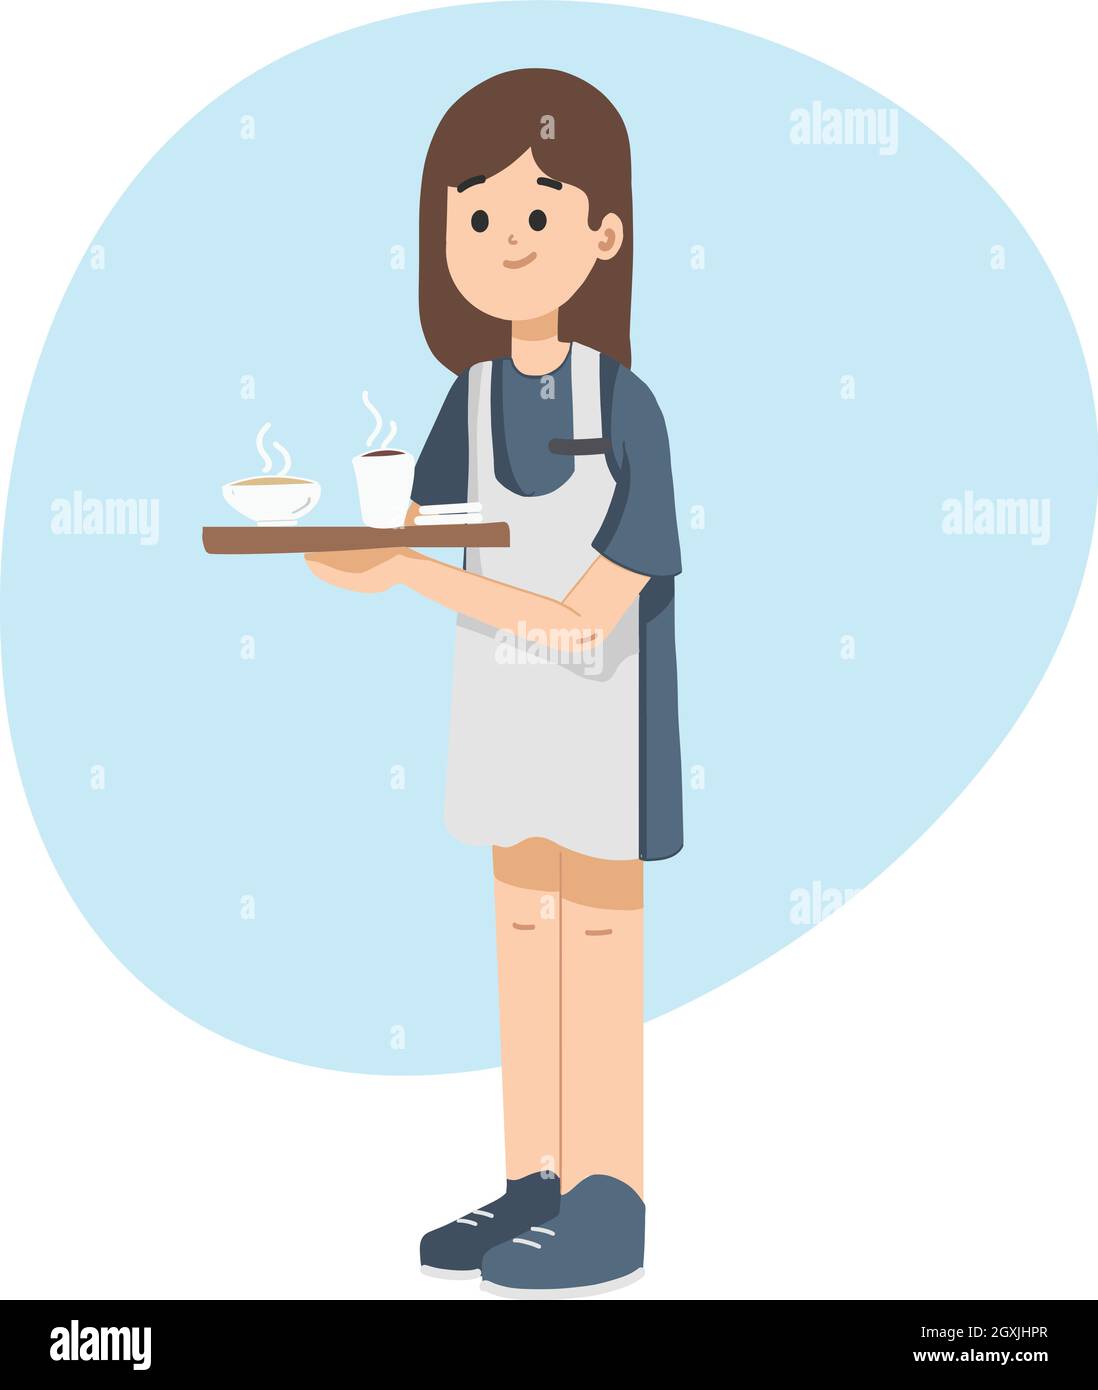 Girl holding tray and serving coffee, tea at coffee shop. Cute waitress serving coffee. Flat isolated vector illustration. Stock Vector